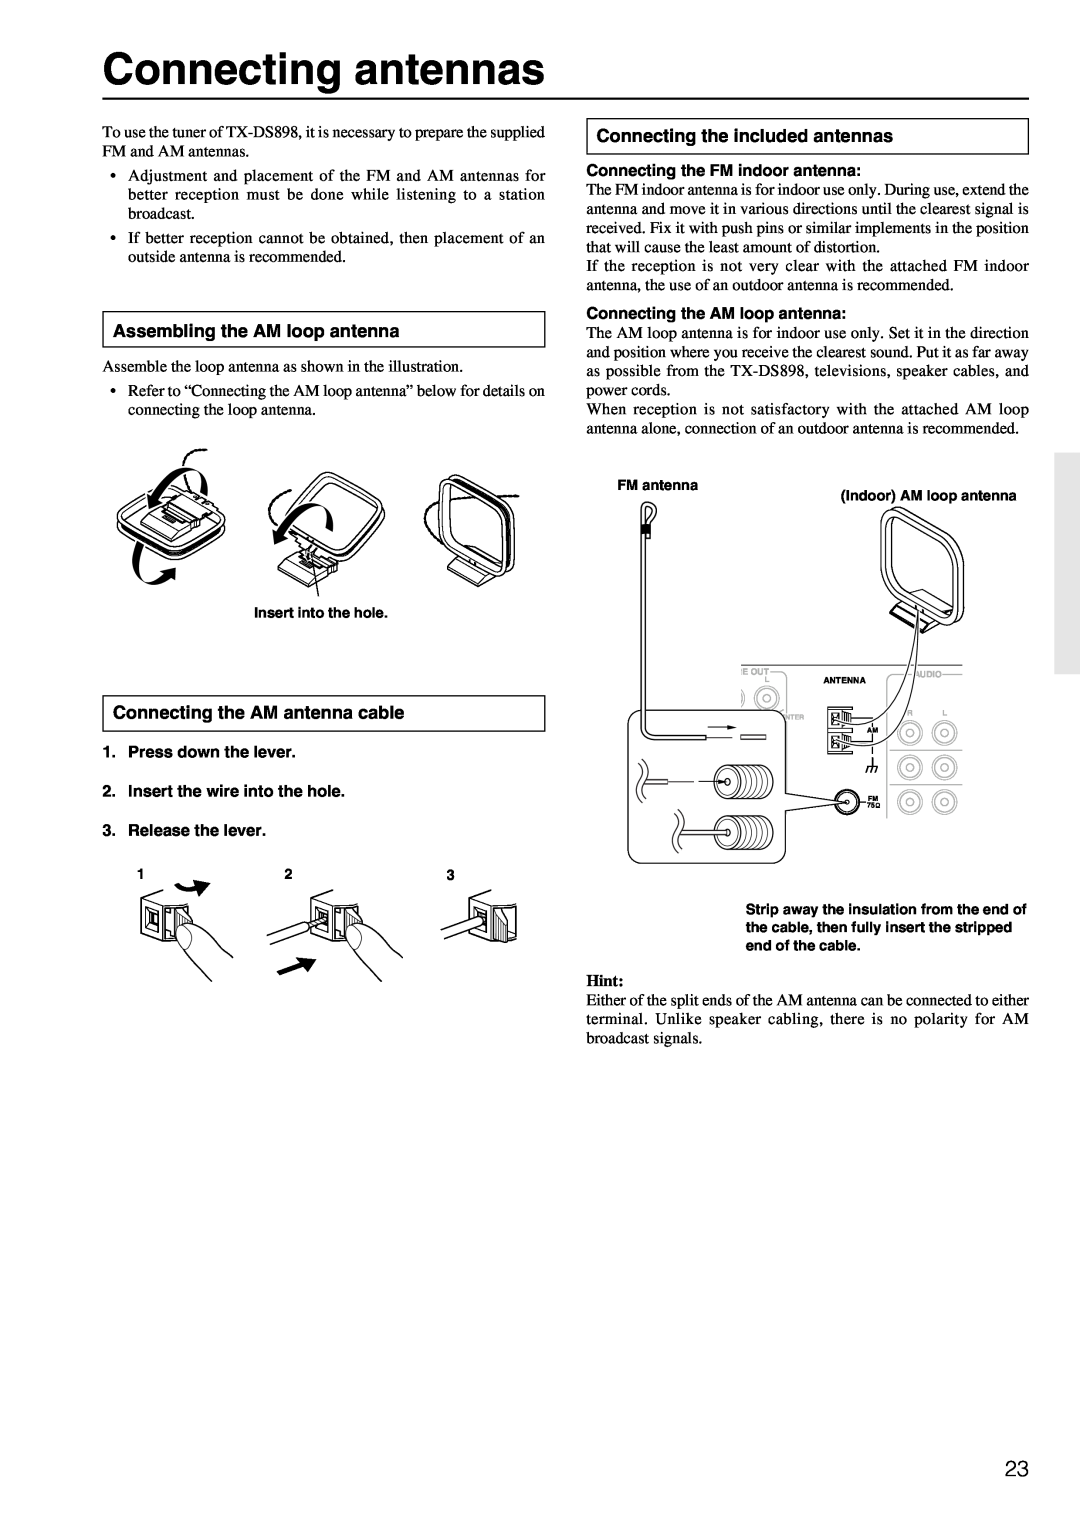 Onkyo TX-DS898 instruction manual Connecting antennas, Assembling the AM loop antenna, Connecting the included antennas 